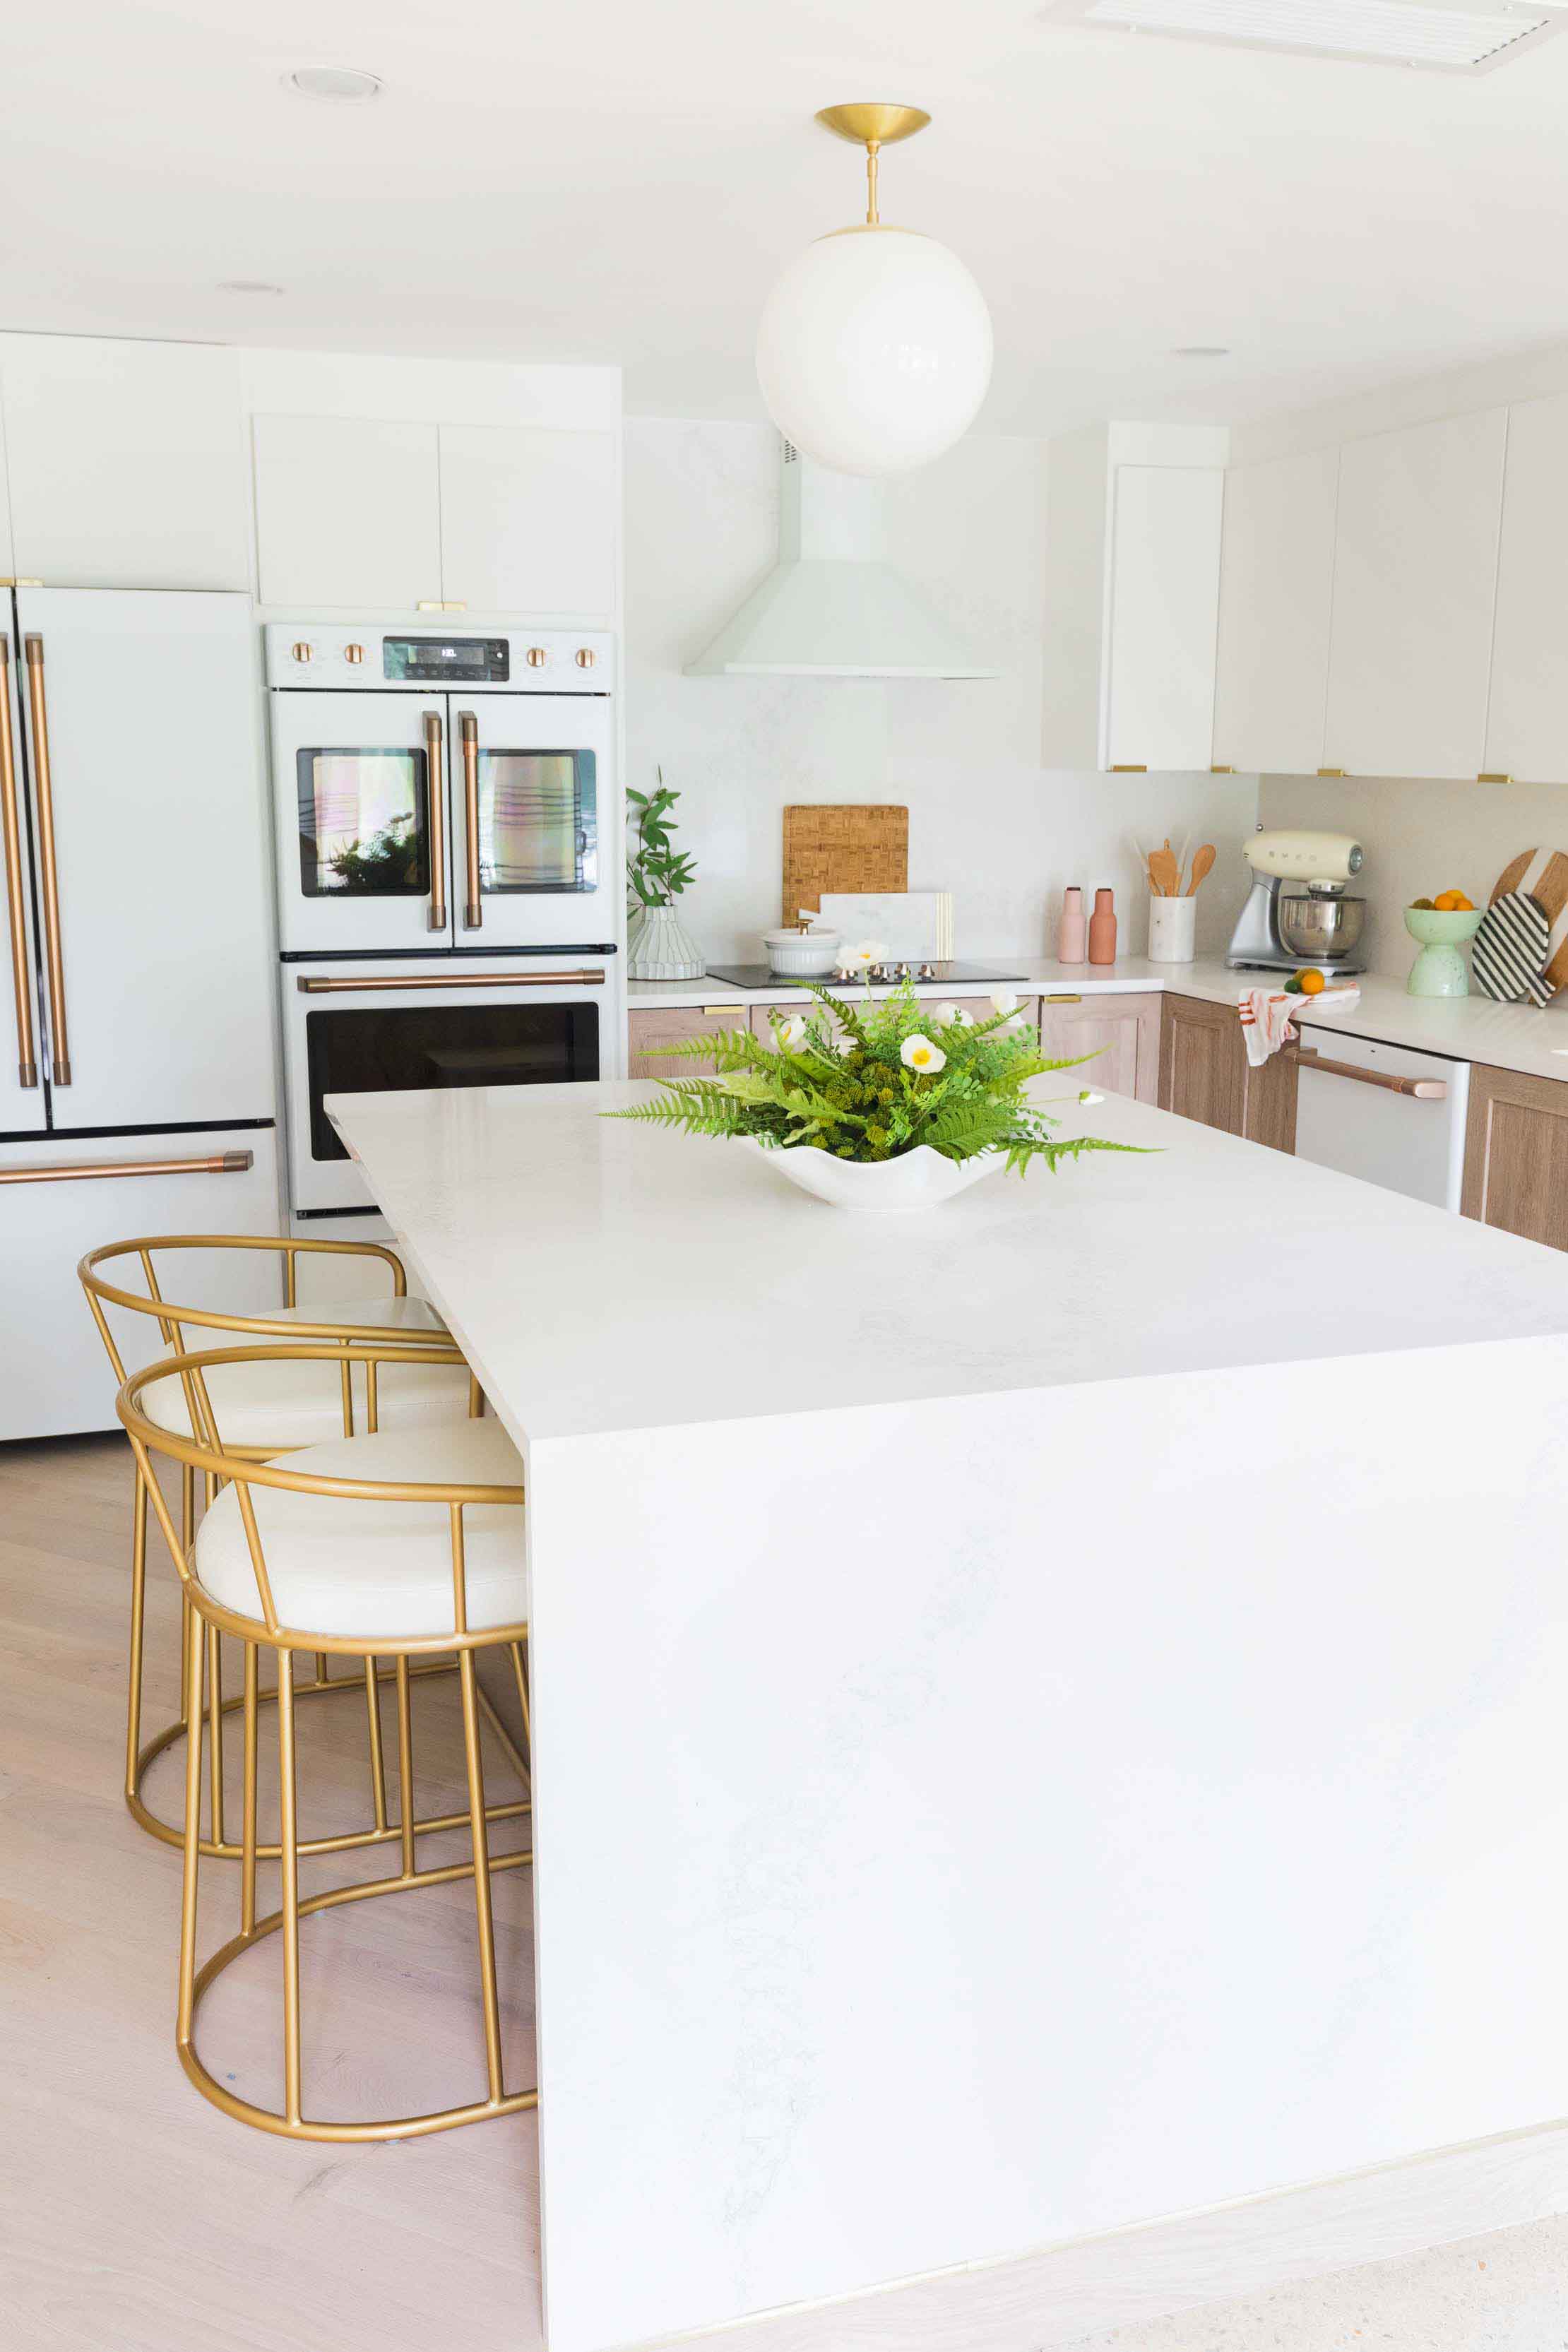 Our kitchen renovation was at the very top of my to-do list when we bought this fixer upper and I'm so excited to share the final kitchen before and after photos!! Sugar & Cloth Casa: Our Renovation Kitchen Before & After by top Houston lifestyle blogger Ashley Rose of Sugar and Cloth #kitchen #decor #design #makeover 